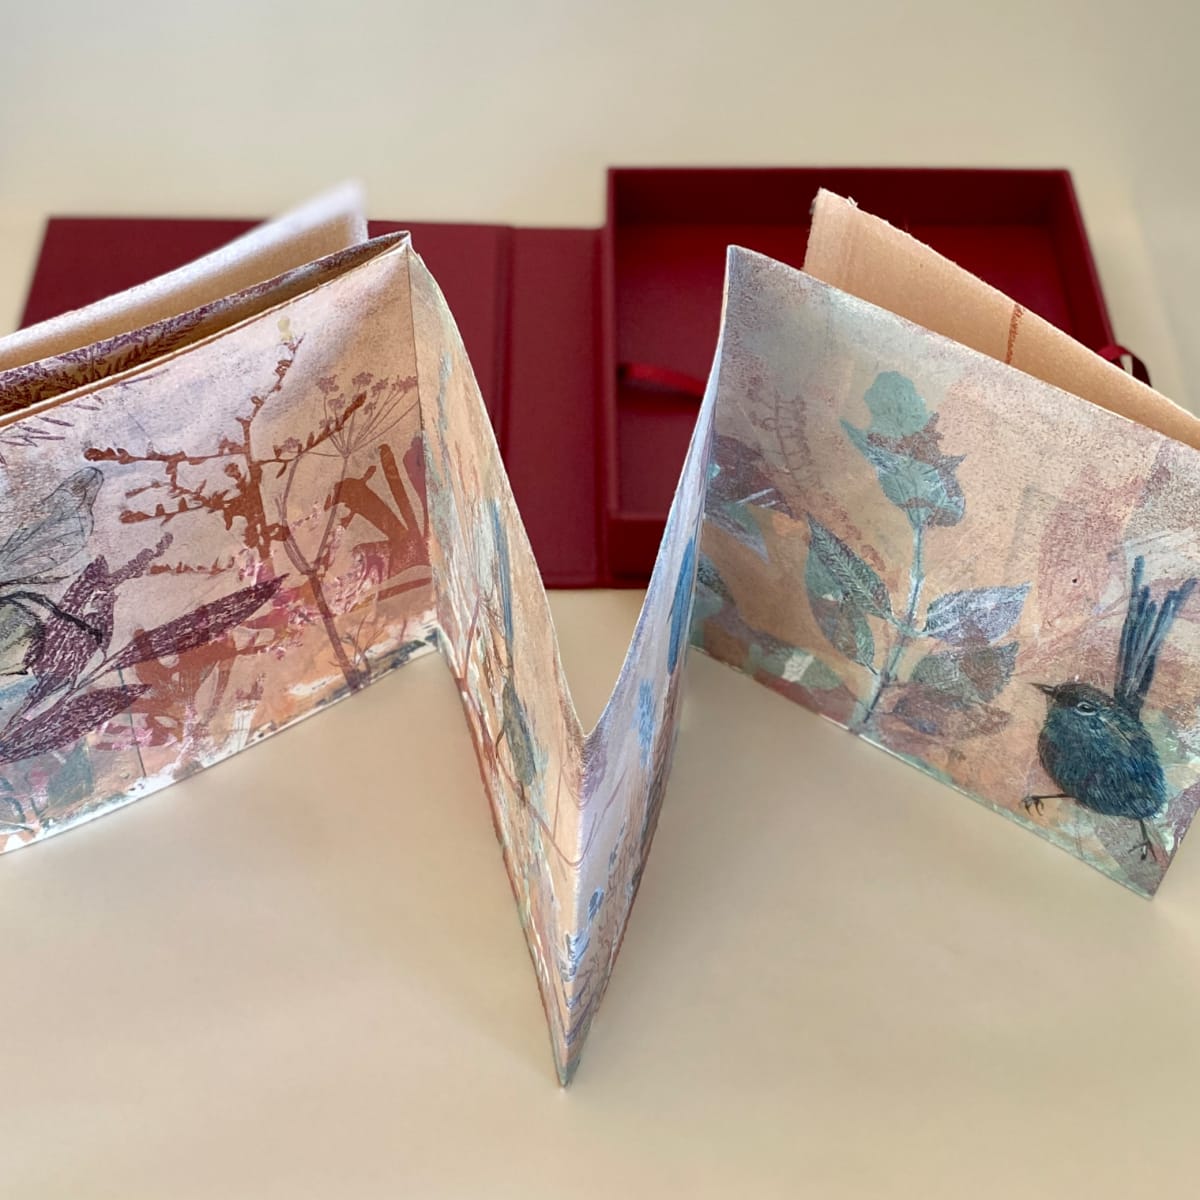 ARTISTS BOOK The Birds and the Bees  Image: Book Box and Concertina Artists Book